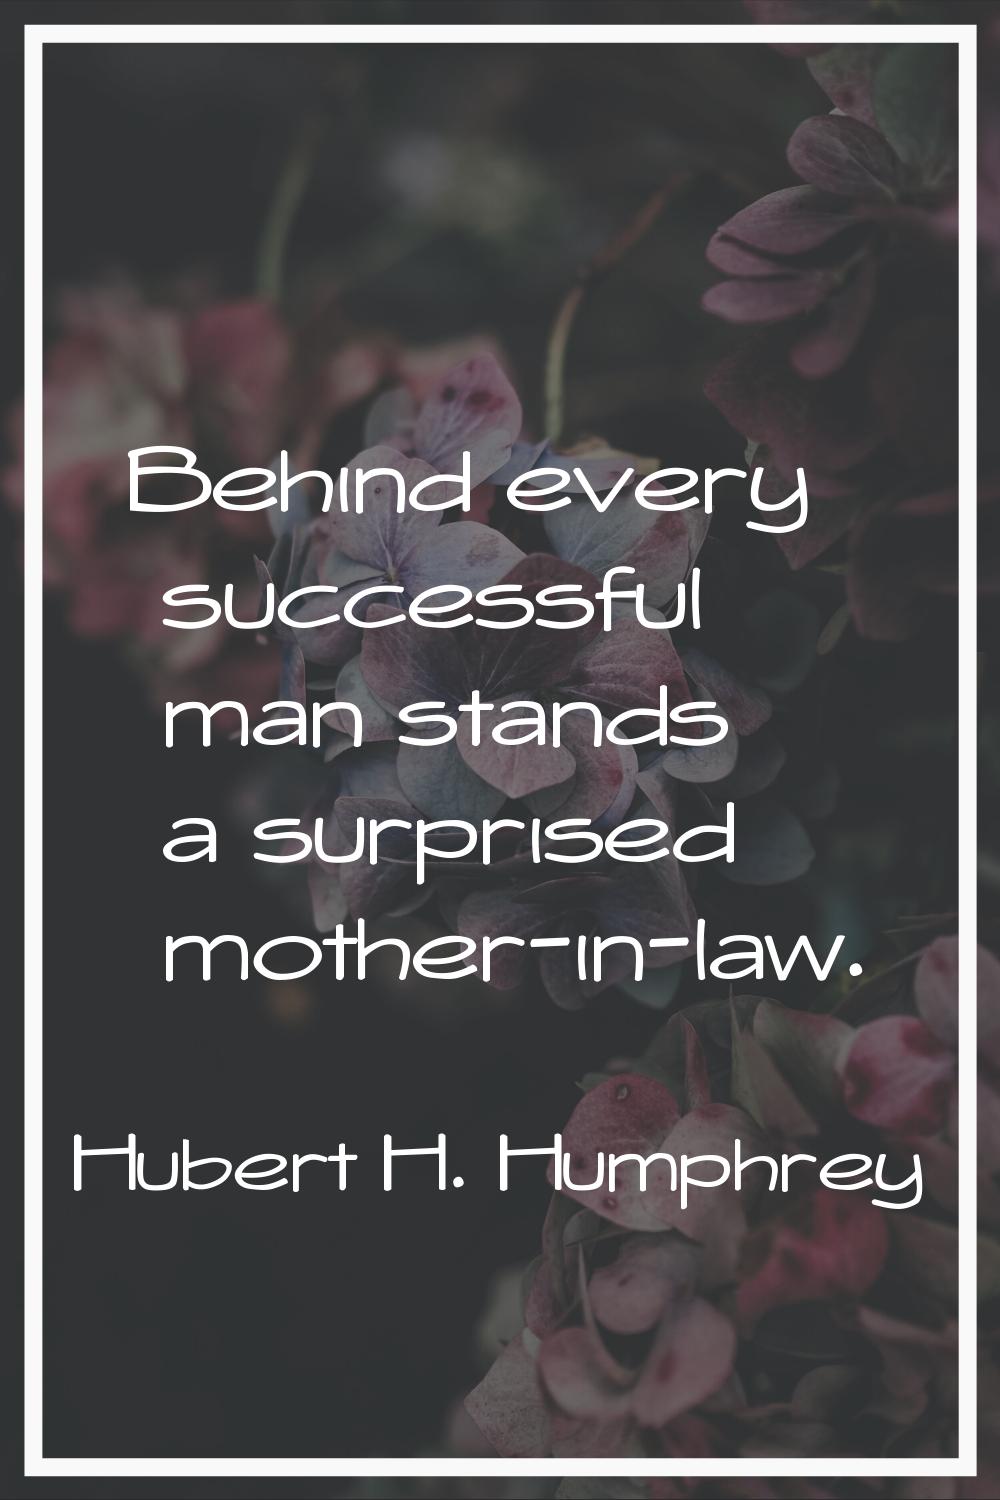 Behind every successful man stands a surprised mother-in-law.